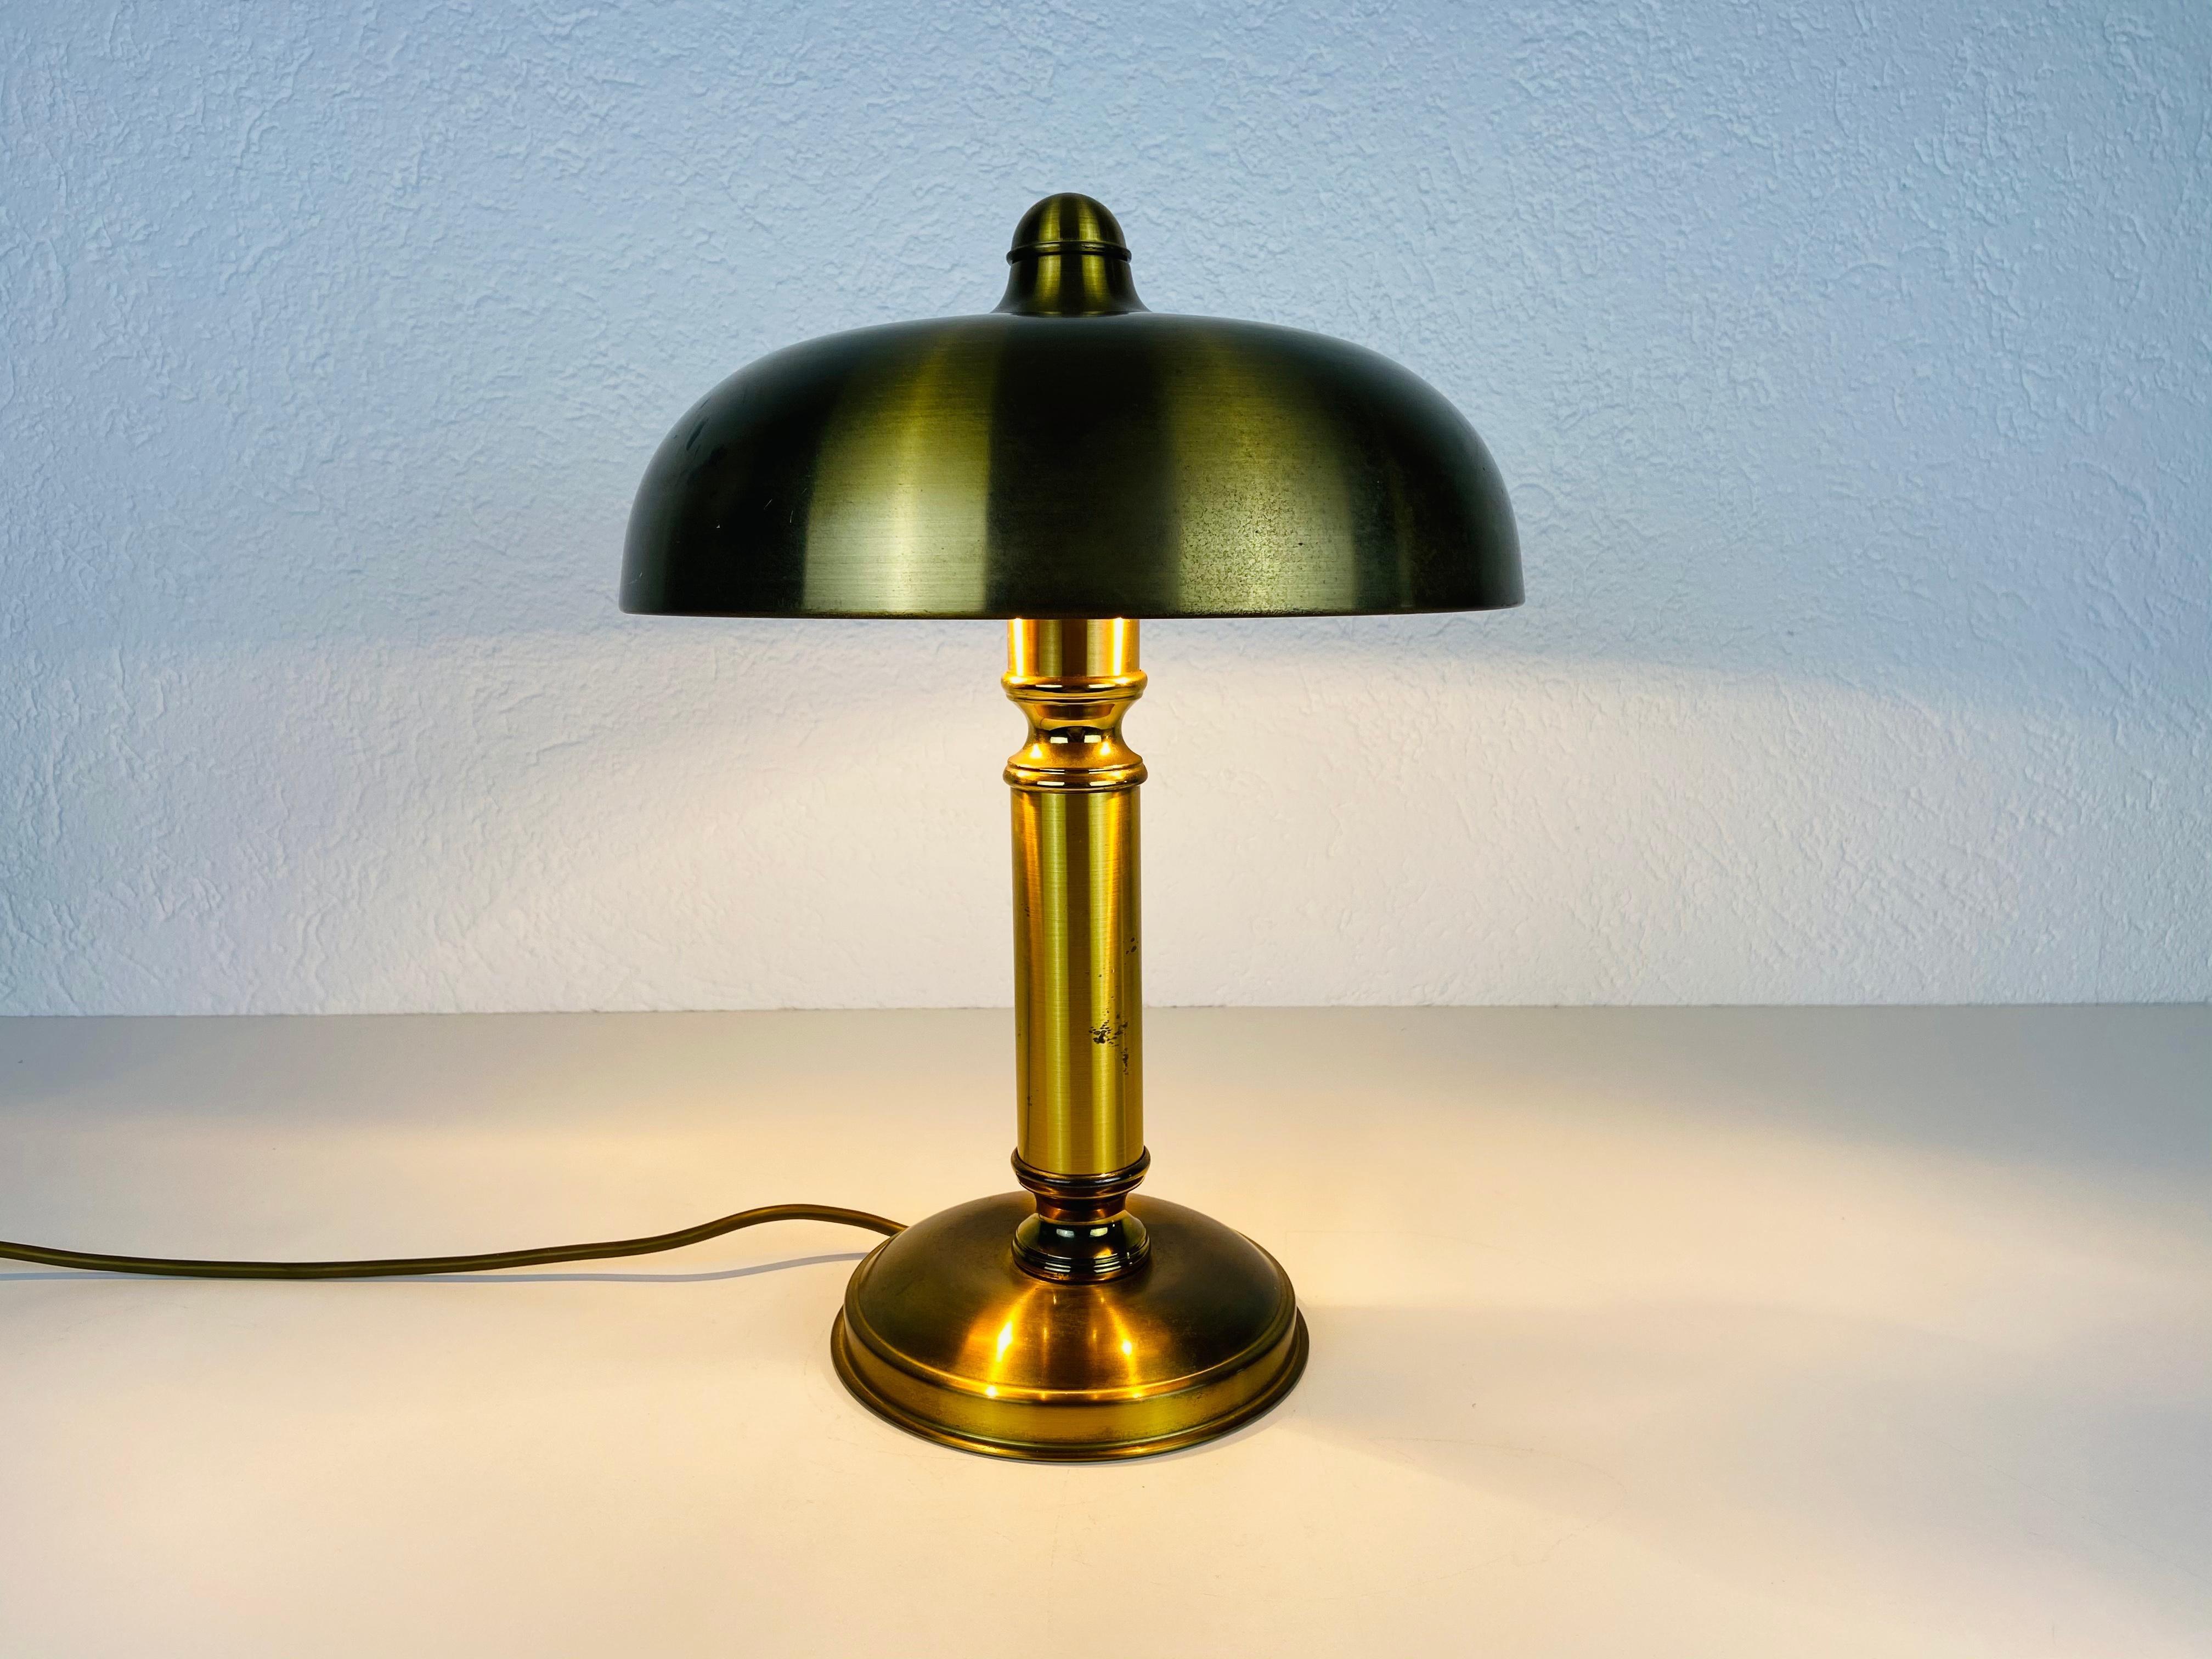 One of two table lamps made in Germany in the 1960s.

The light requires one E27 (US E26) light bulb. Works with both 220V/120V. Good vintage condition.

Free worldwide express shipping.